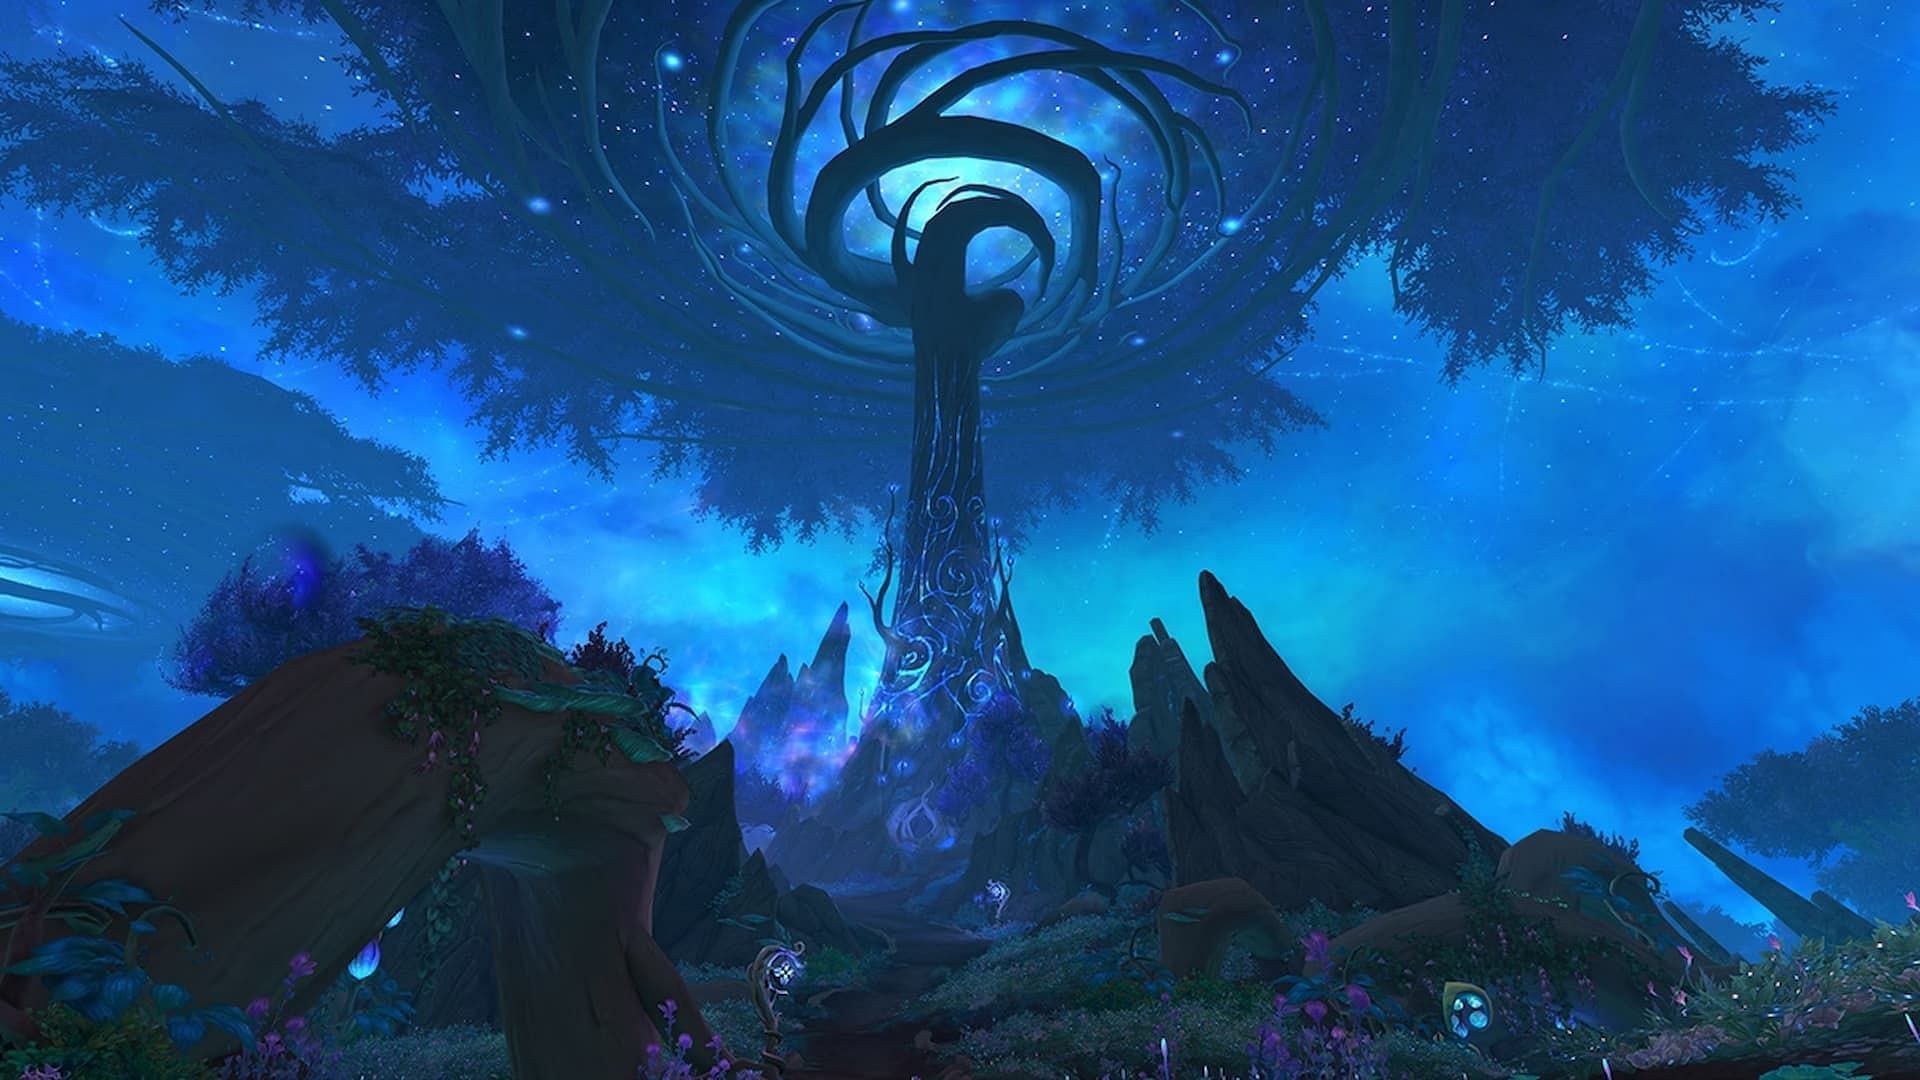 Ardenweald is a domain of restoration tended by the mystic night fae in World of Warcraft. (Image via Blizzard Entertainment)